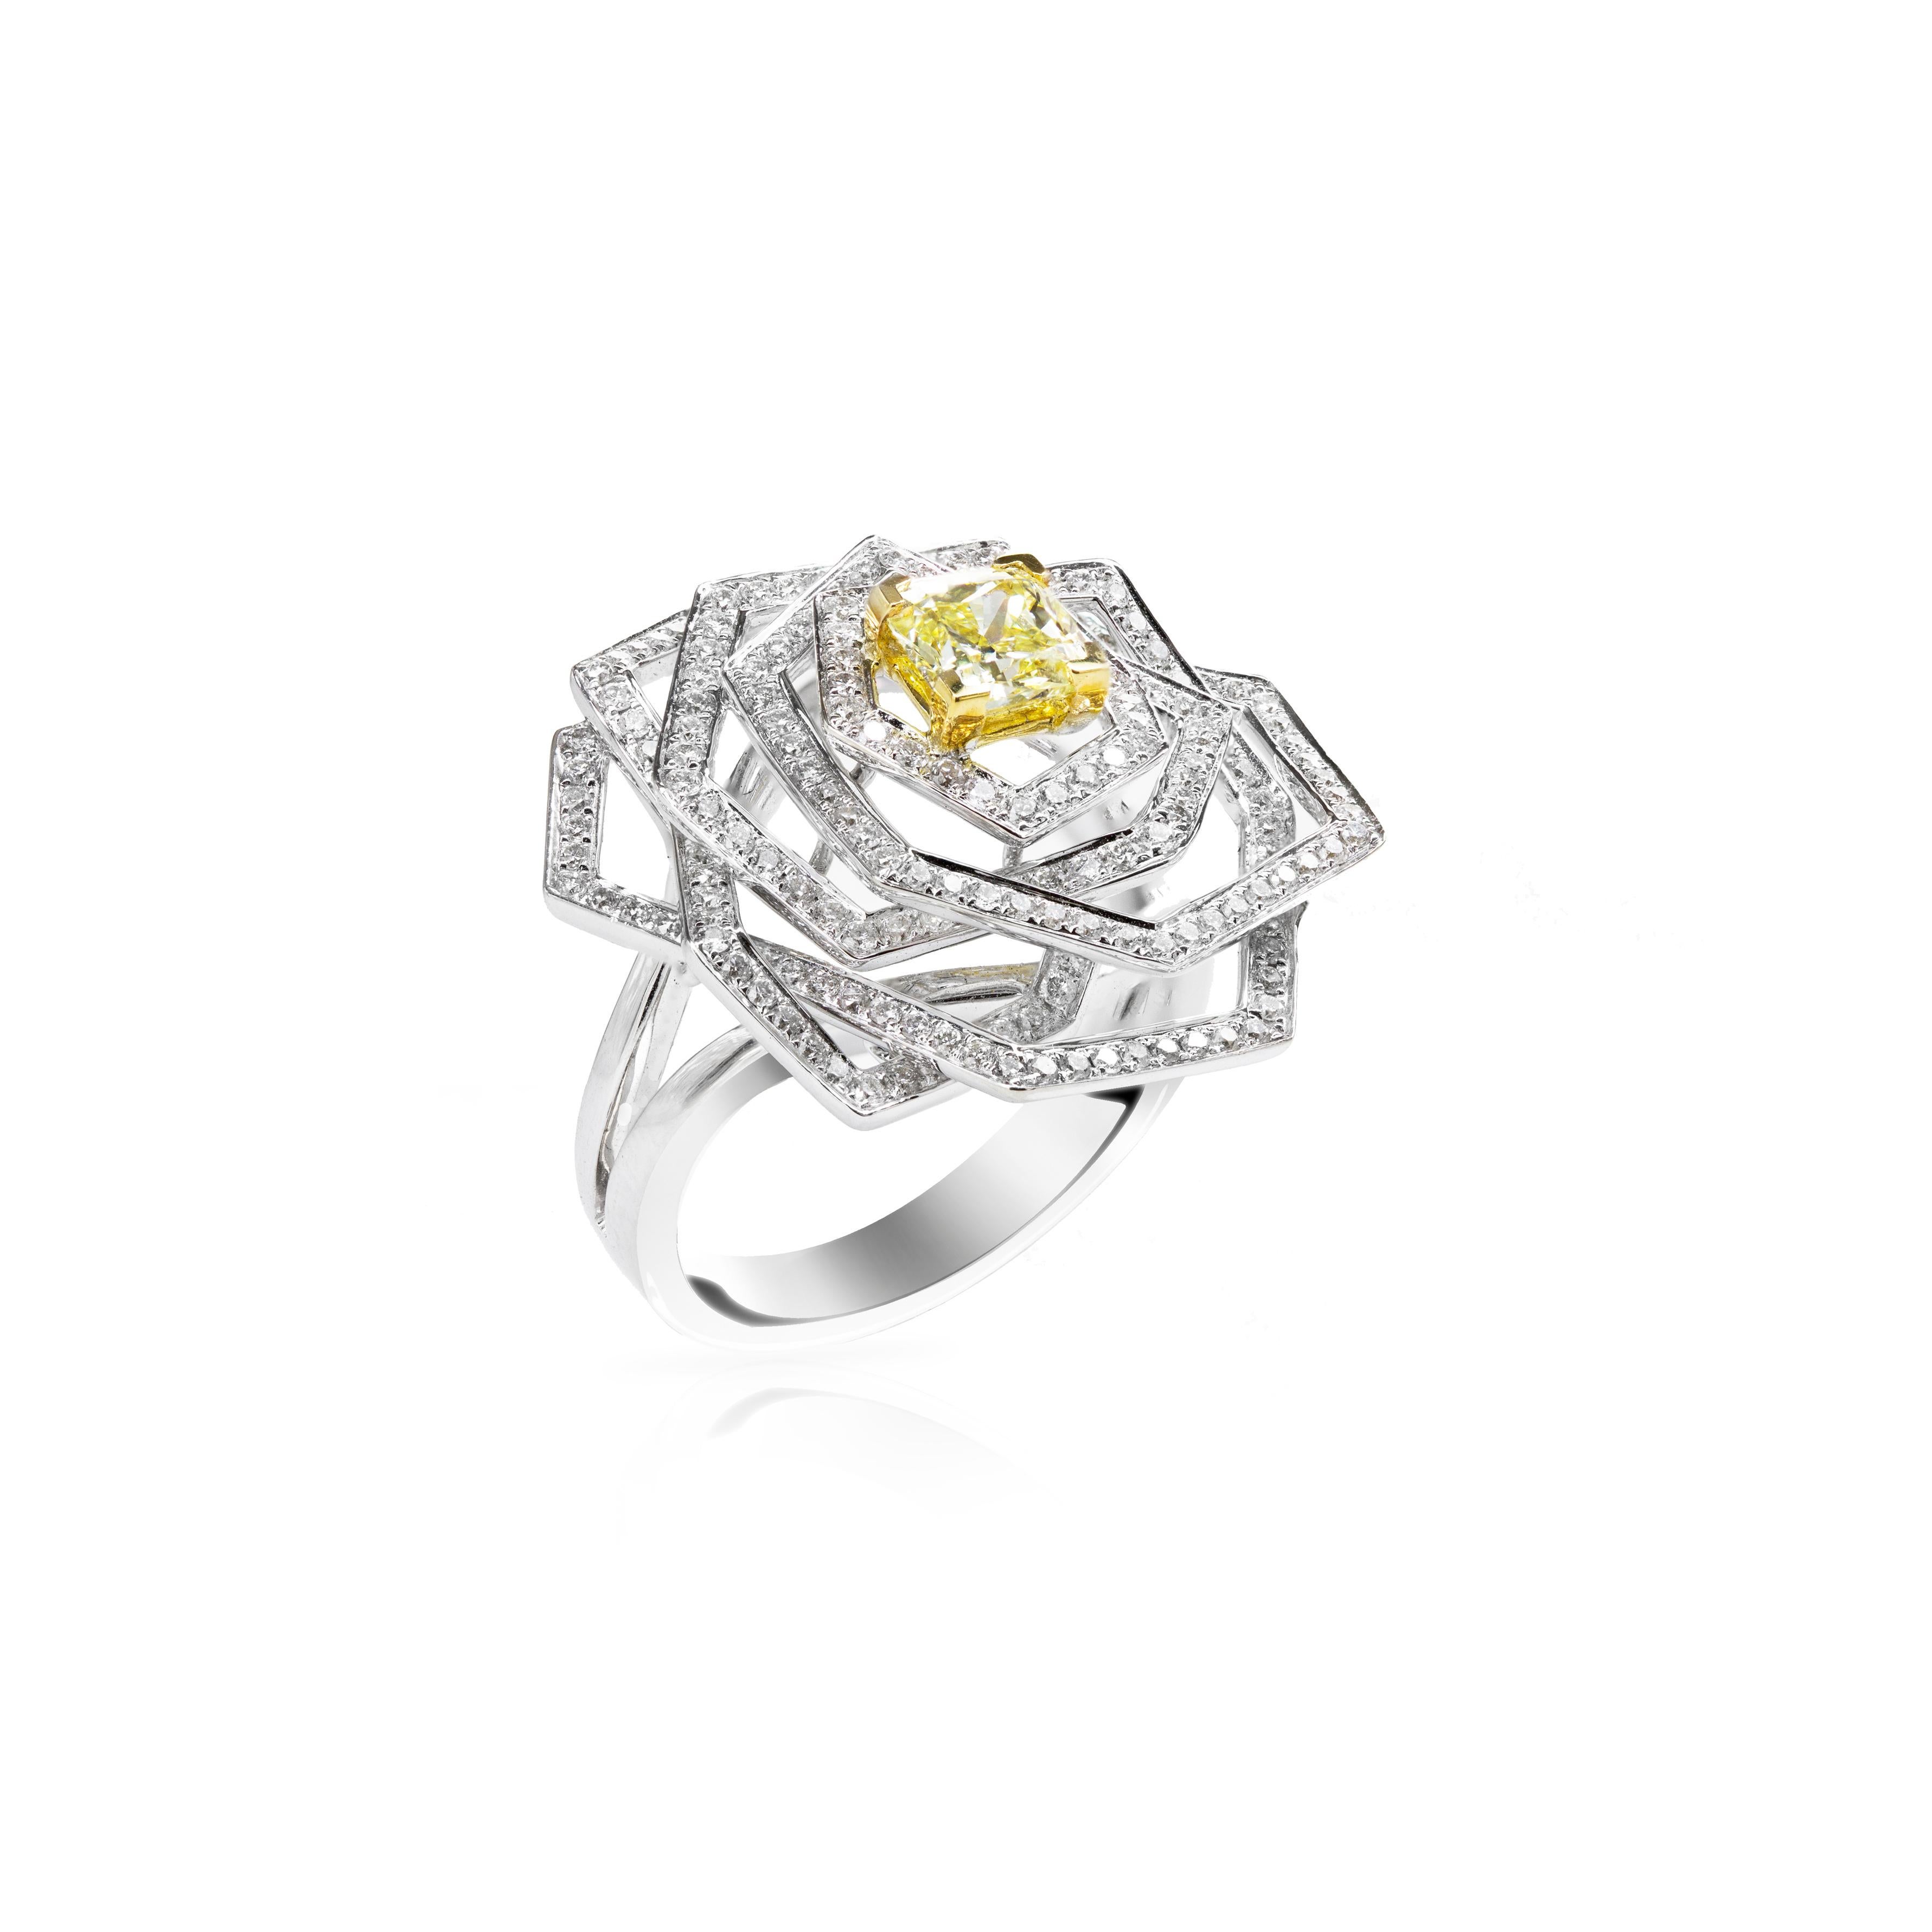 A unique and chic ring showcasing a cluster of geometric shapes encrusted with brilliant diamonds made to a rose flower design. Center is a 0.81 carats yellow diamond certified by GIA as Fancy intense yellow color and VS2 in clarity set in four